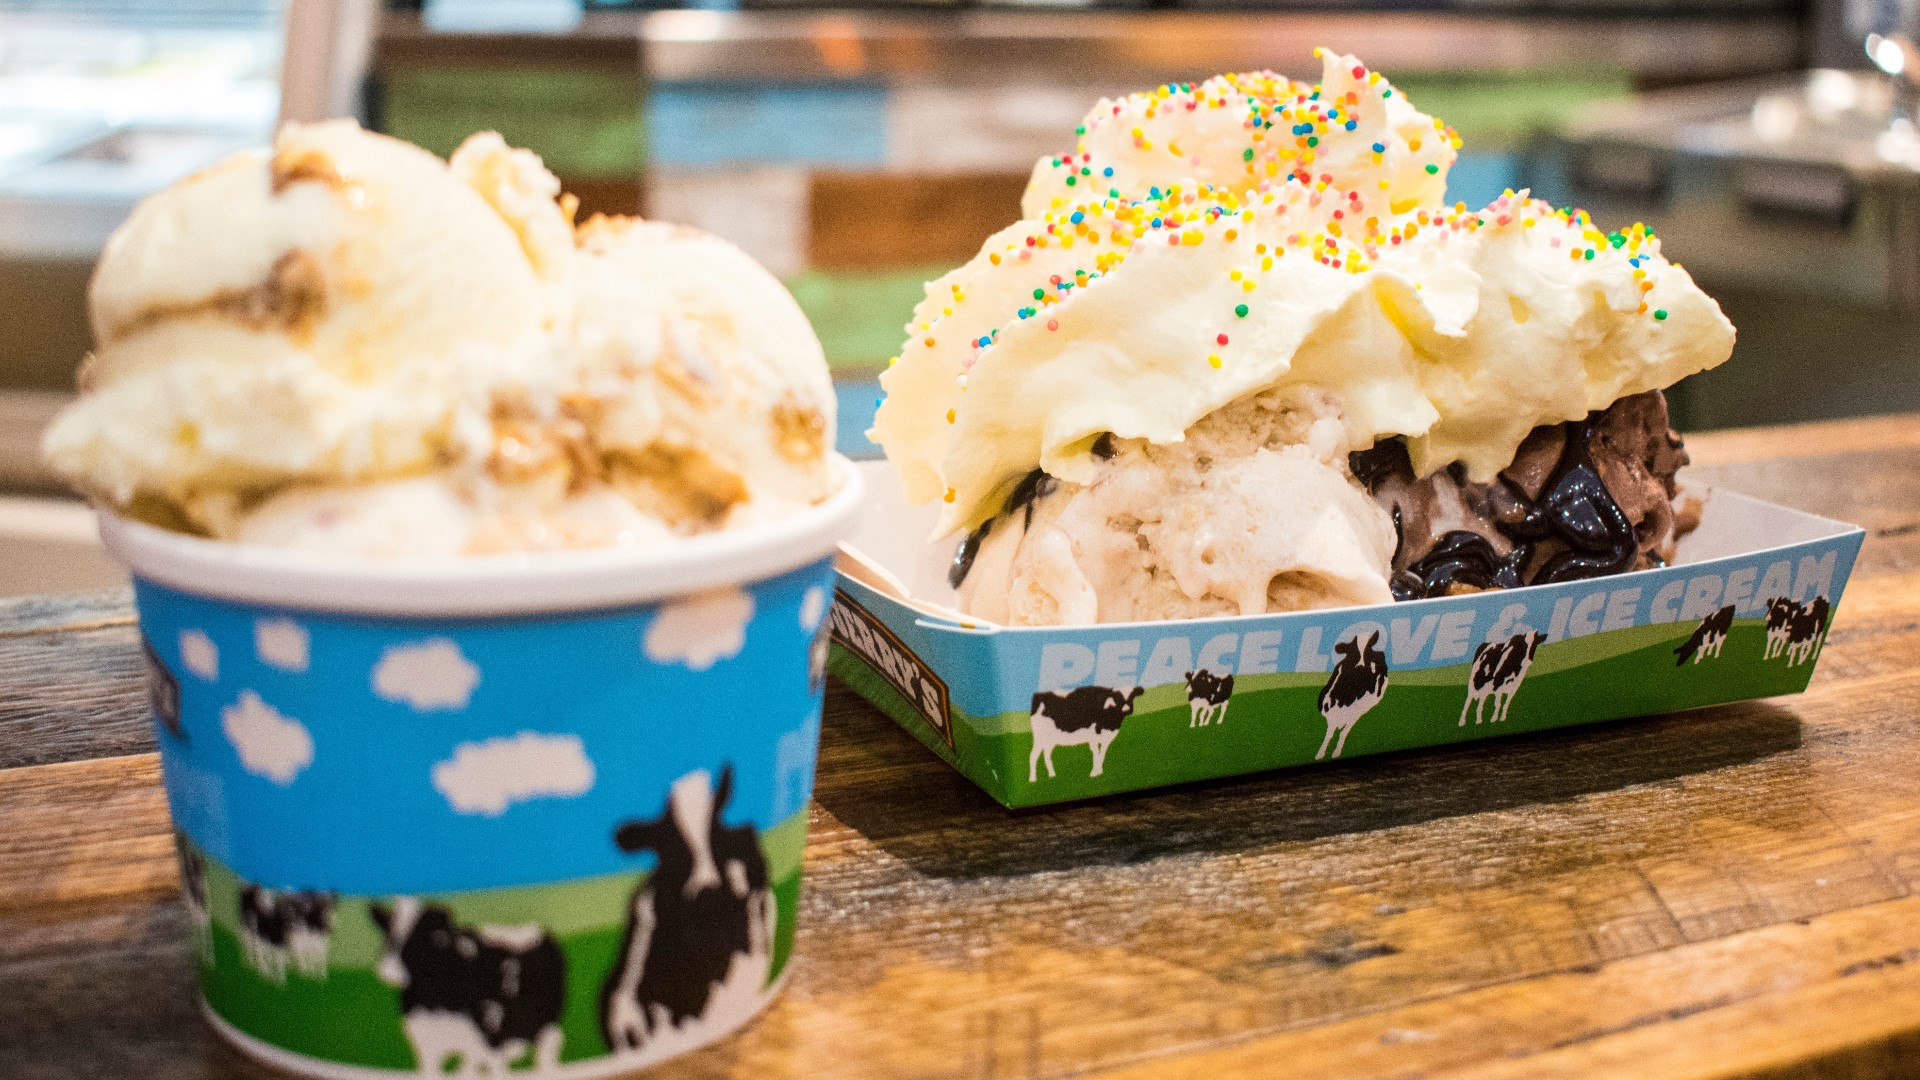 Black-owned Ben & Jerry's opens in Midtown Tampa